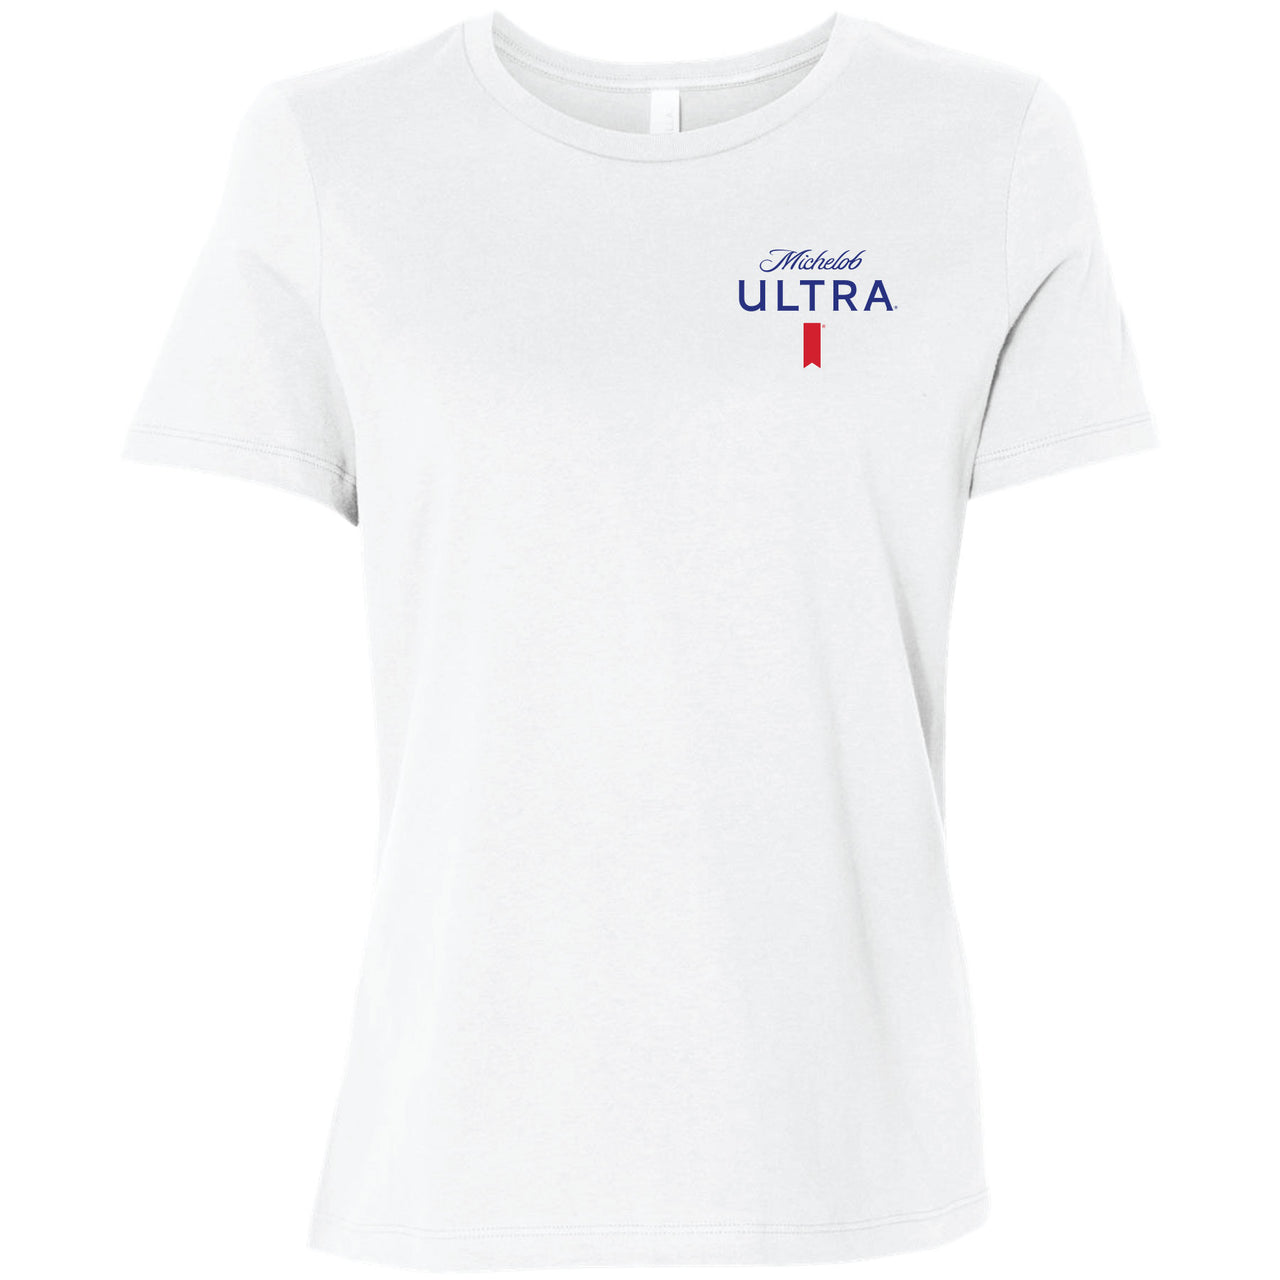 Michelob Tee Time Ladies 2-sided T-shirt